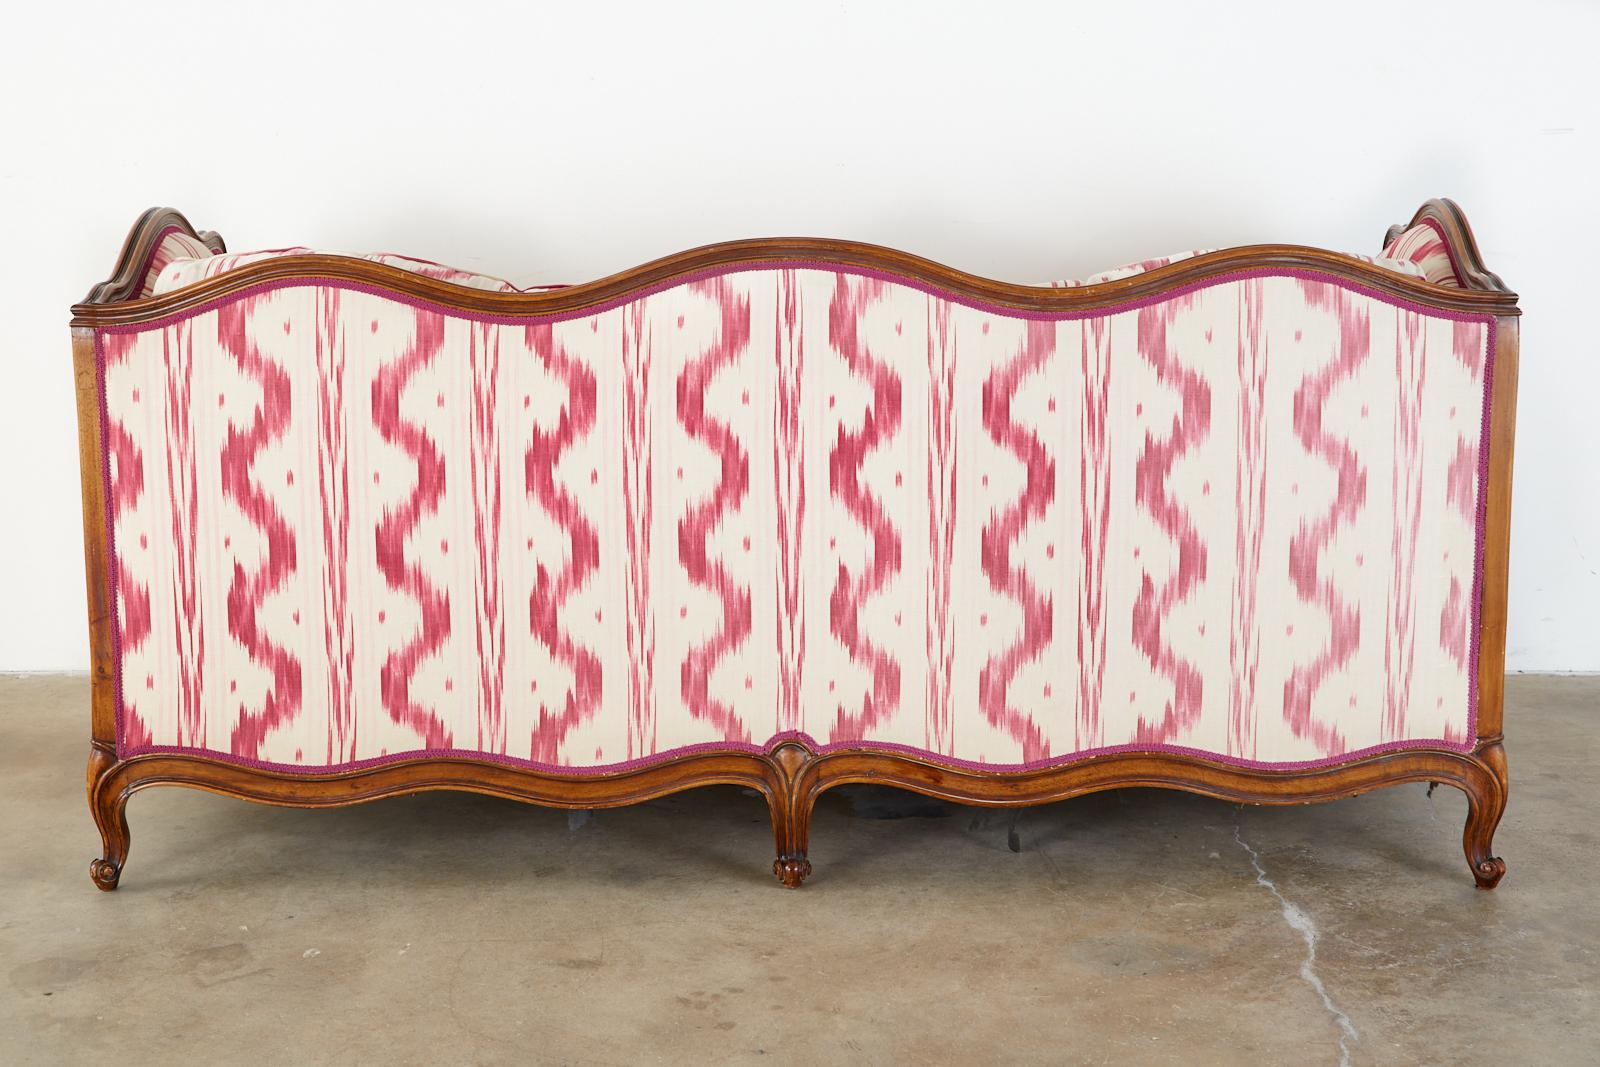 French Provincial Serpentine Canape Settee Pierre Frey Toile Ikat 11